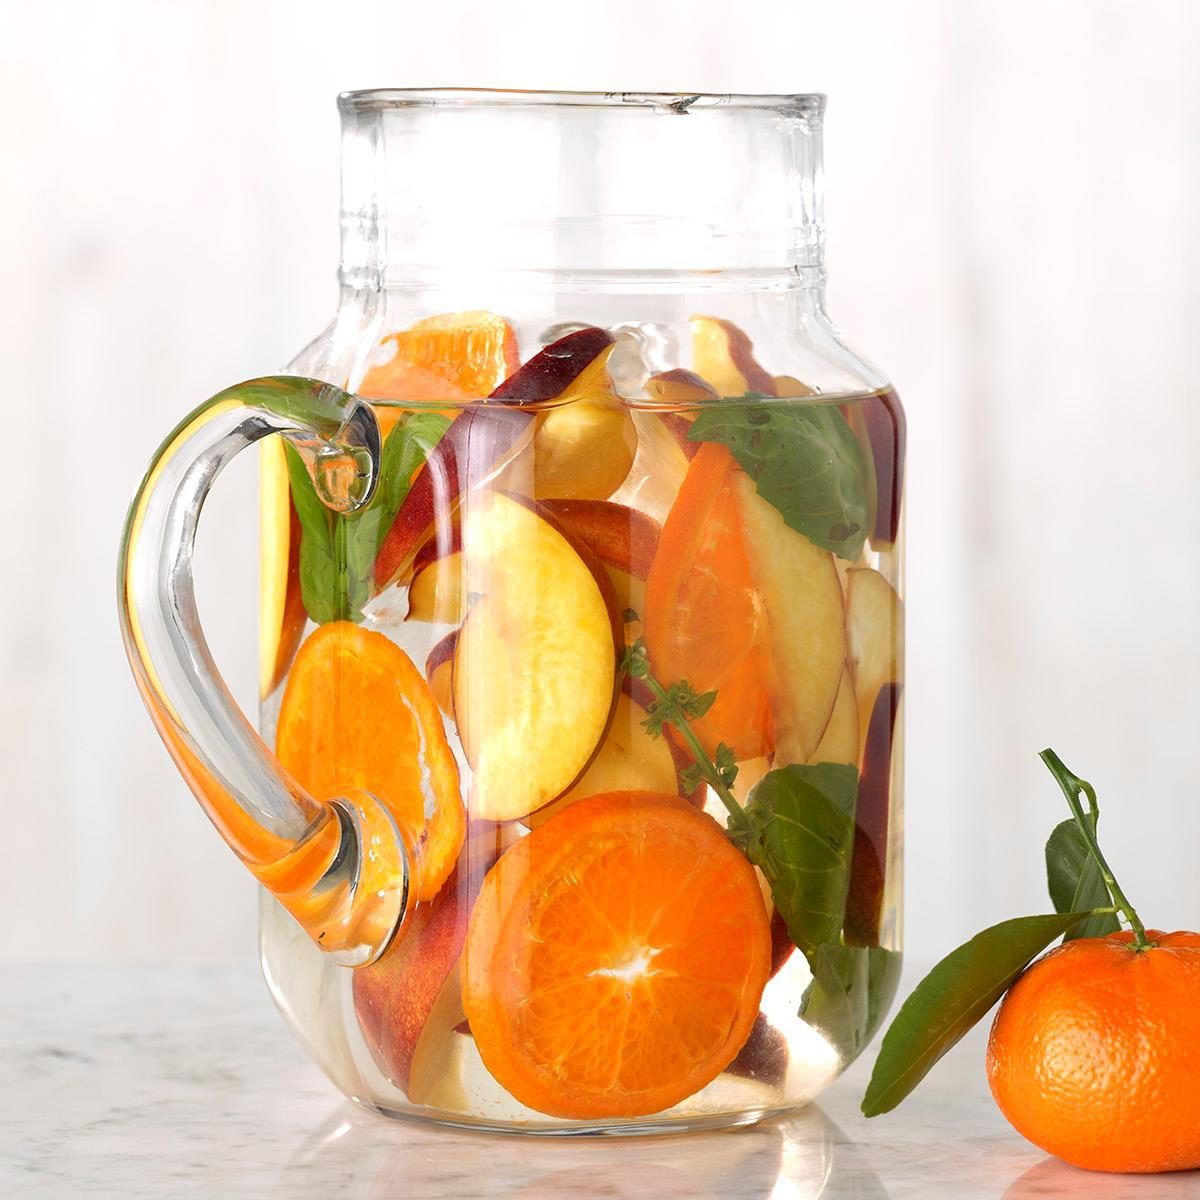 https://www.tasteofhome.com/wp-content/uploads/2018/01/Nectarine-Basil-and-Clementine-Infused-Water_EXPS_JMZ18_224893_C03_07_3b.jpg